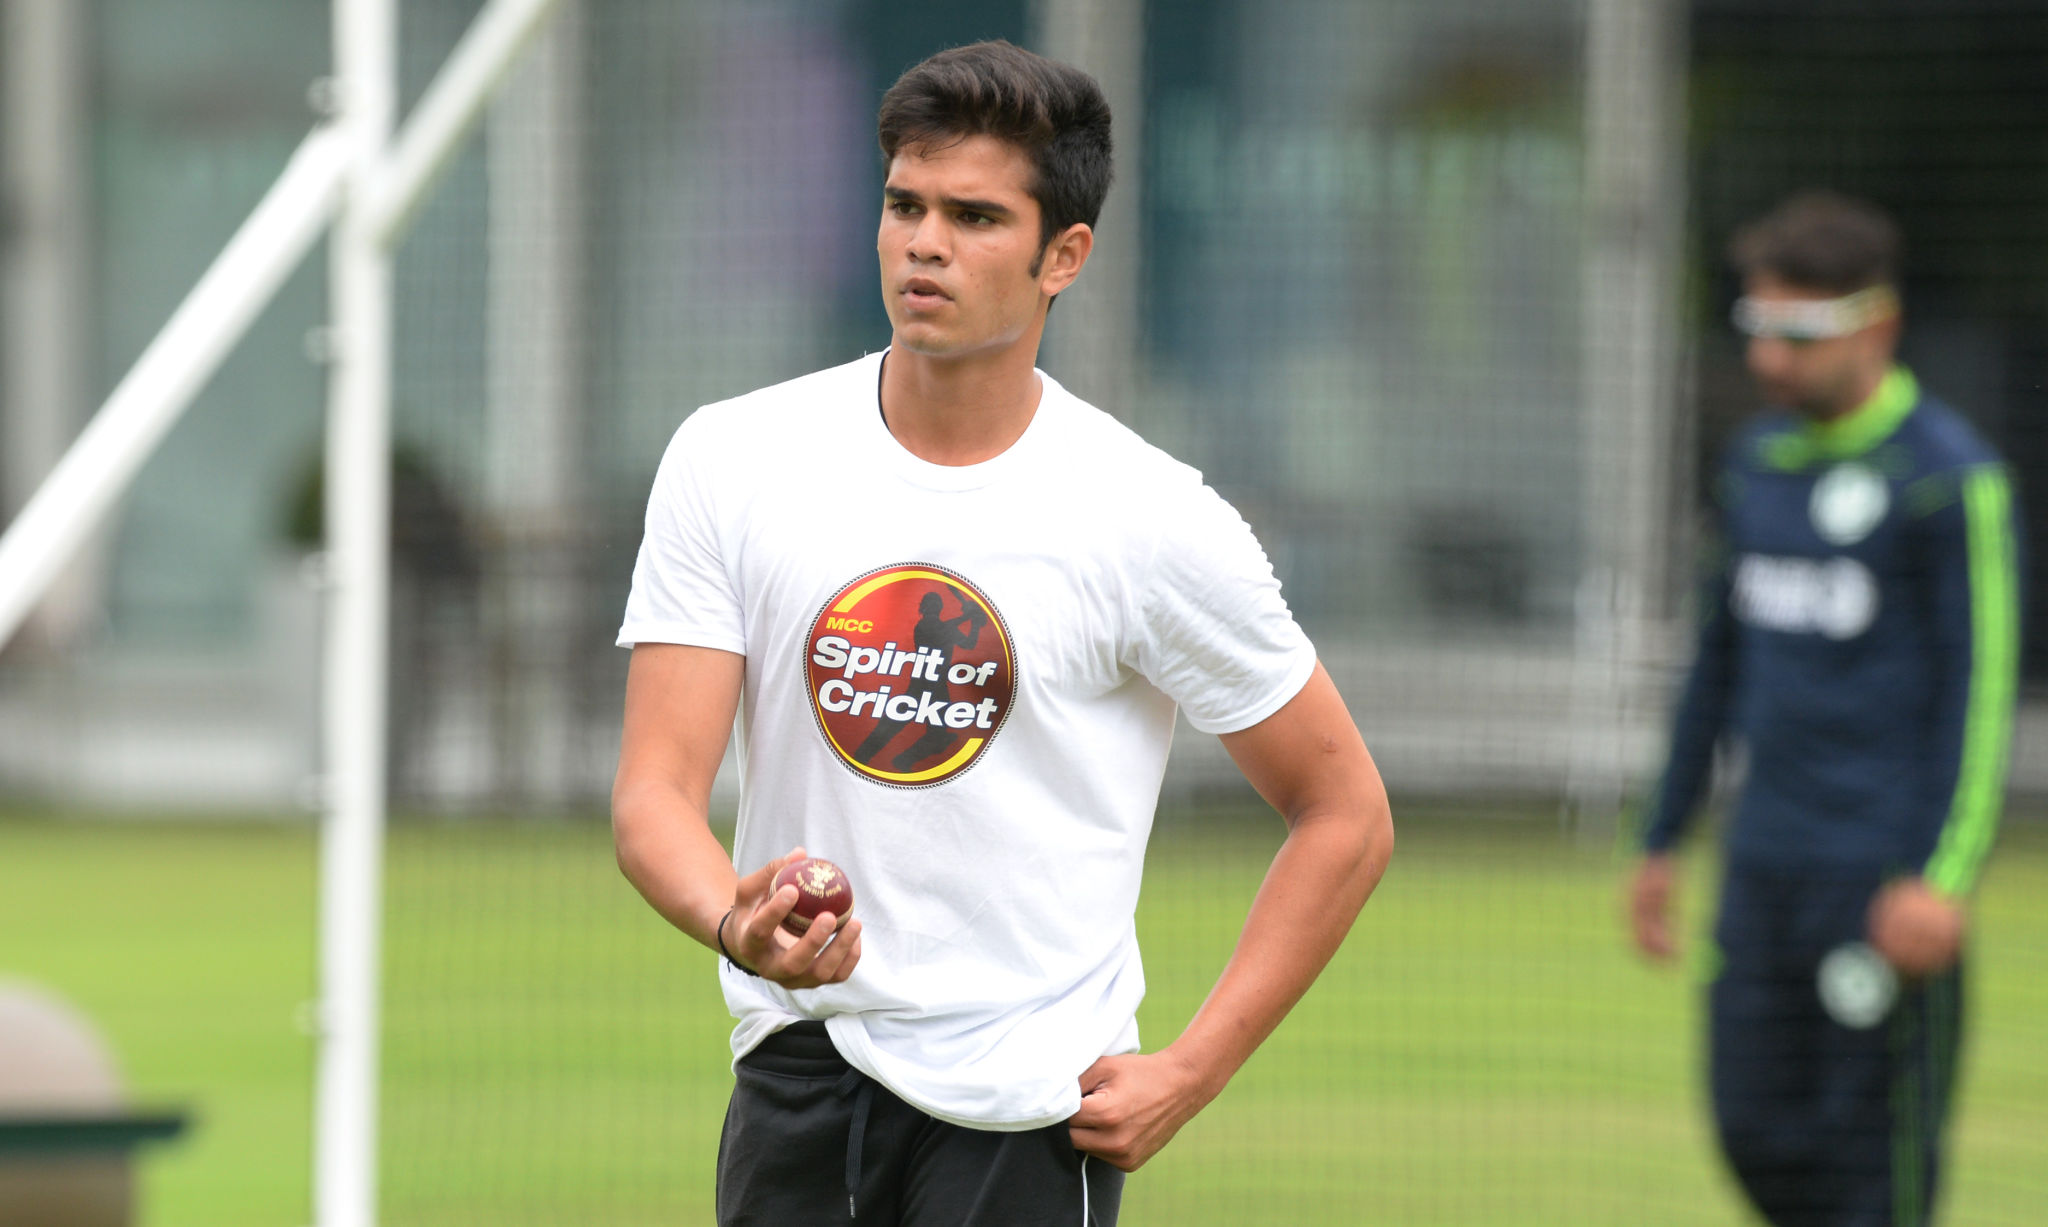 Ranji Trophy 2022: Disappointed after last season's snub, Arjun Tendulkar seeks NOC from Mumbai, set to play for Goa in the upcoming season - Check out